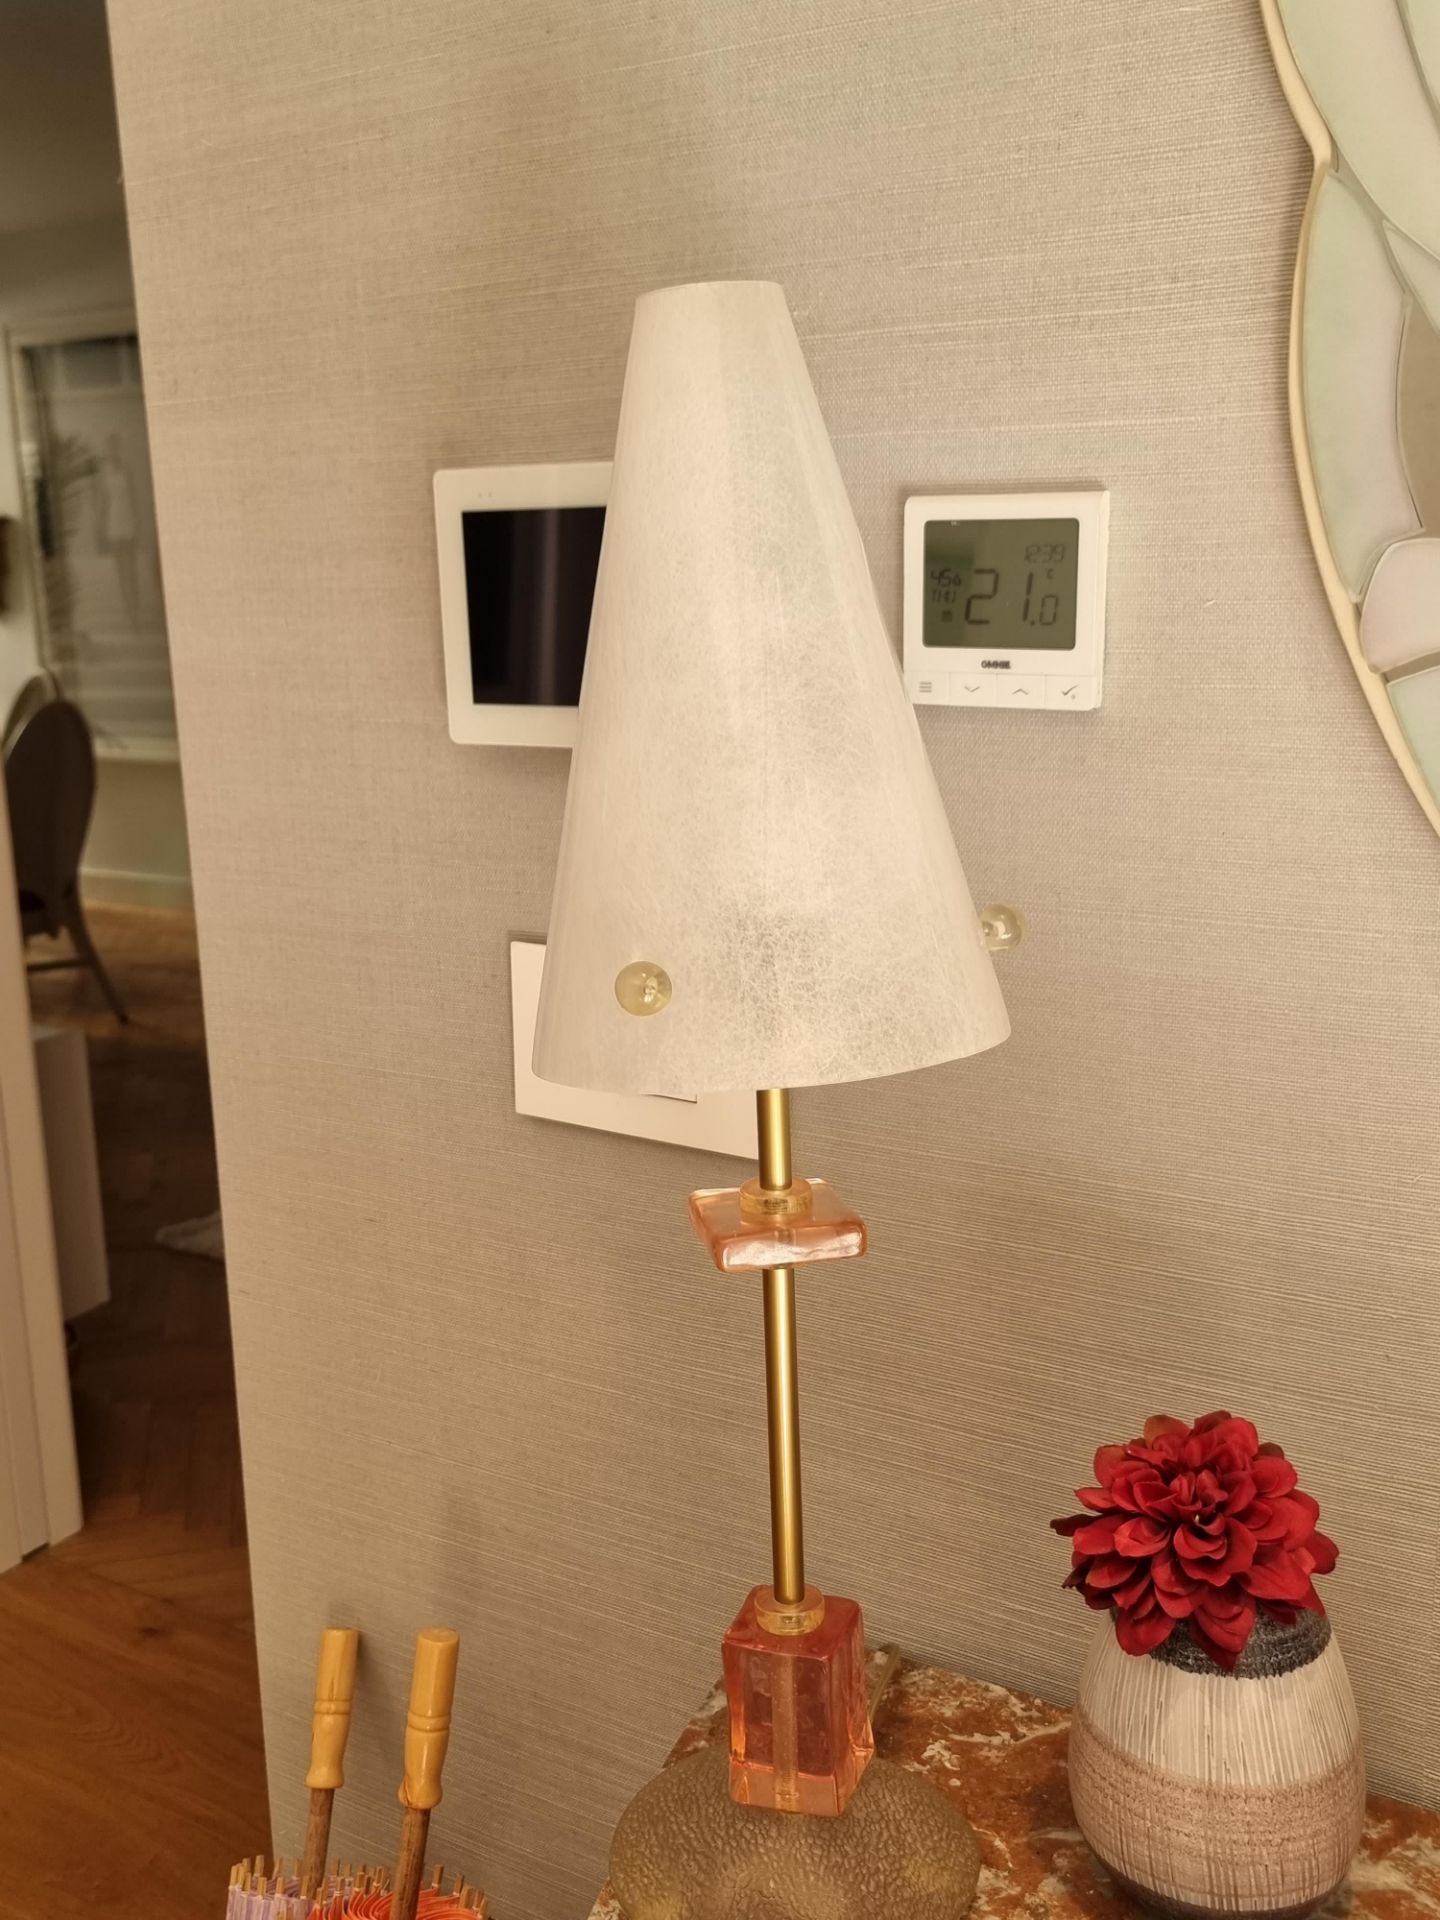 Robert Sonneman Style 1980s Table Lamp - a whimsical and stylish addition to any space. Imported - Image 2 of 4